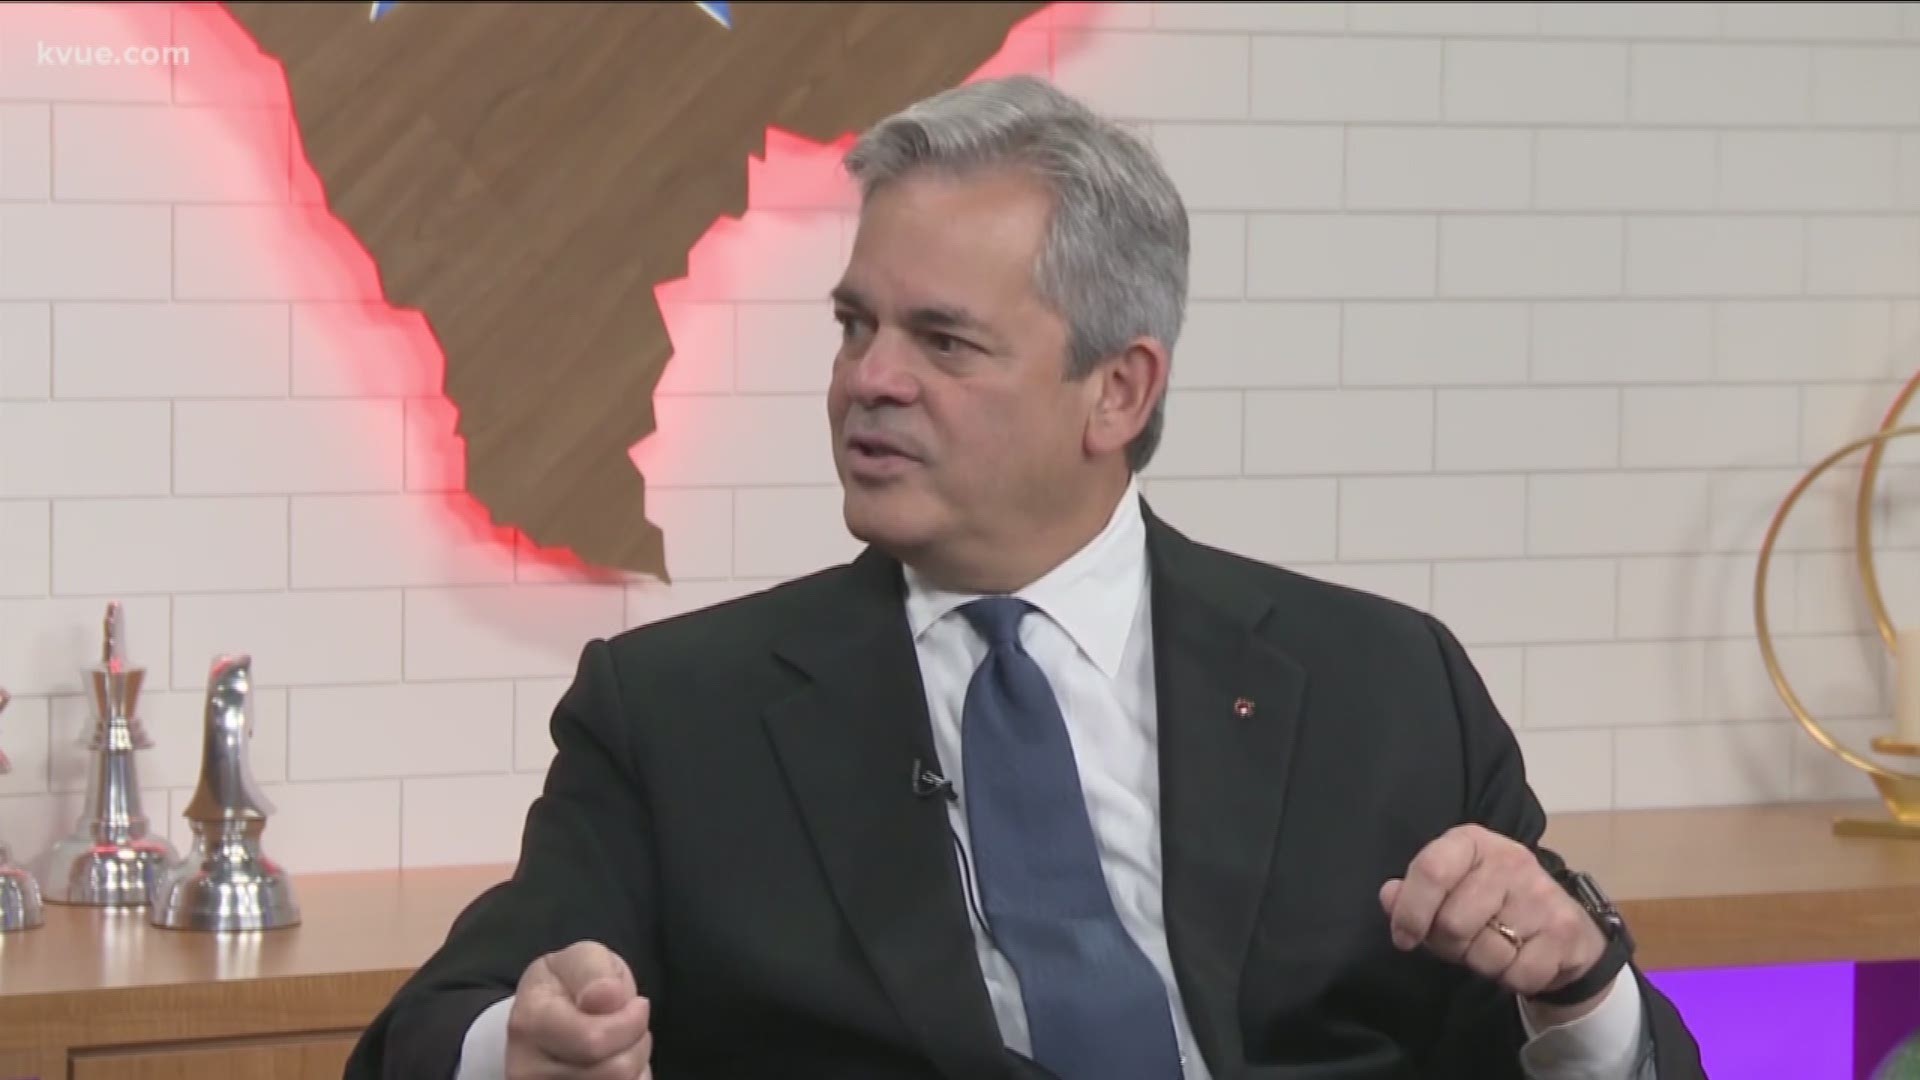 Austin Mayor Steve Adler is sharing his learnings about homelessness from two West Coast cities.